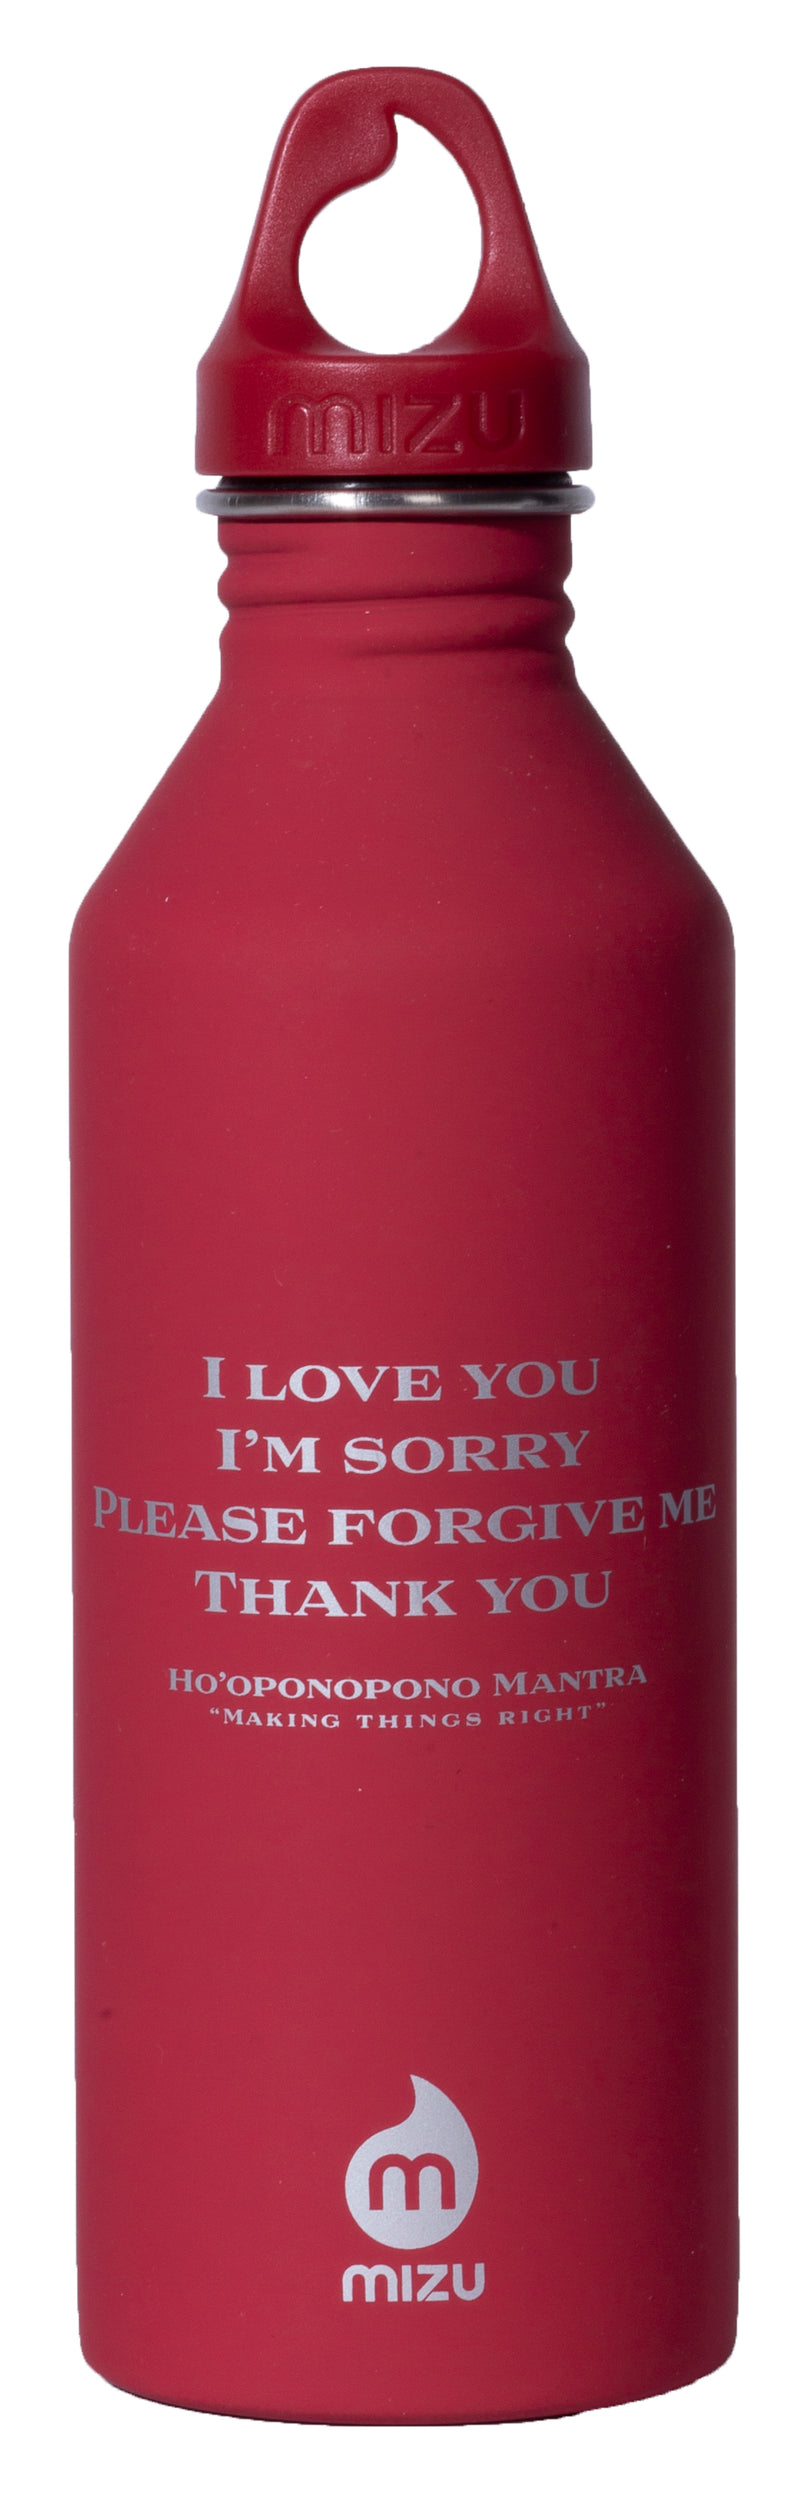 MIRARI® // Divine Warrior® Collection Water Bottle Red with Silver Label